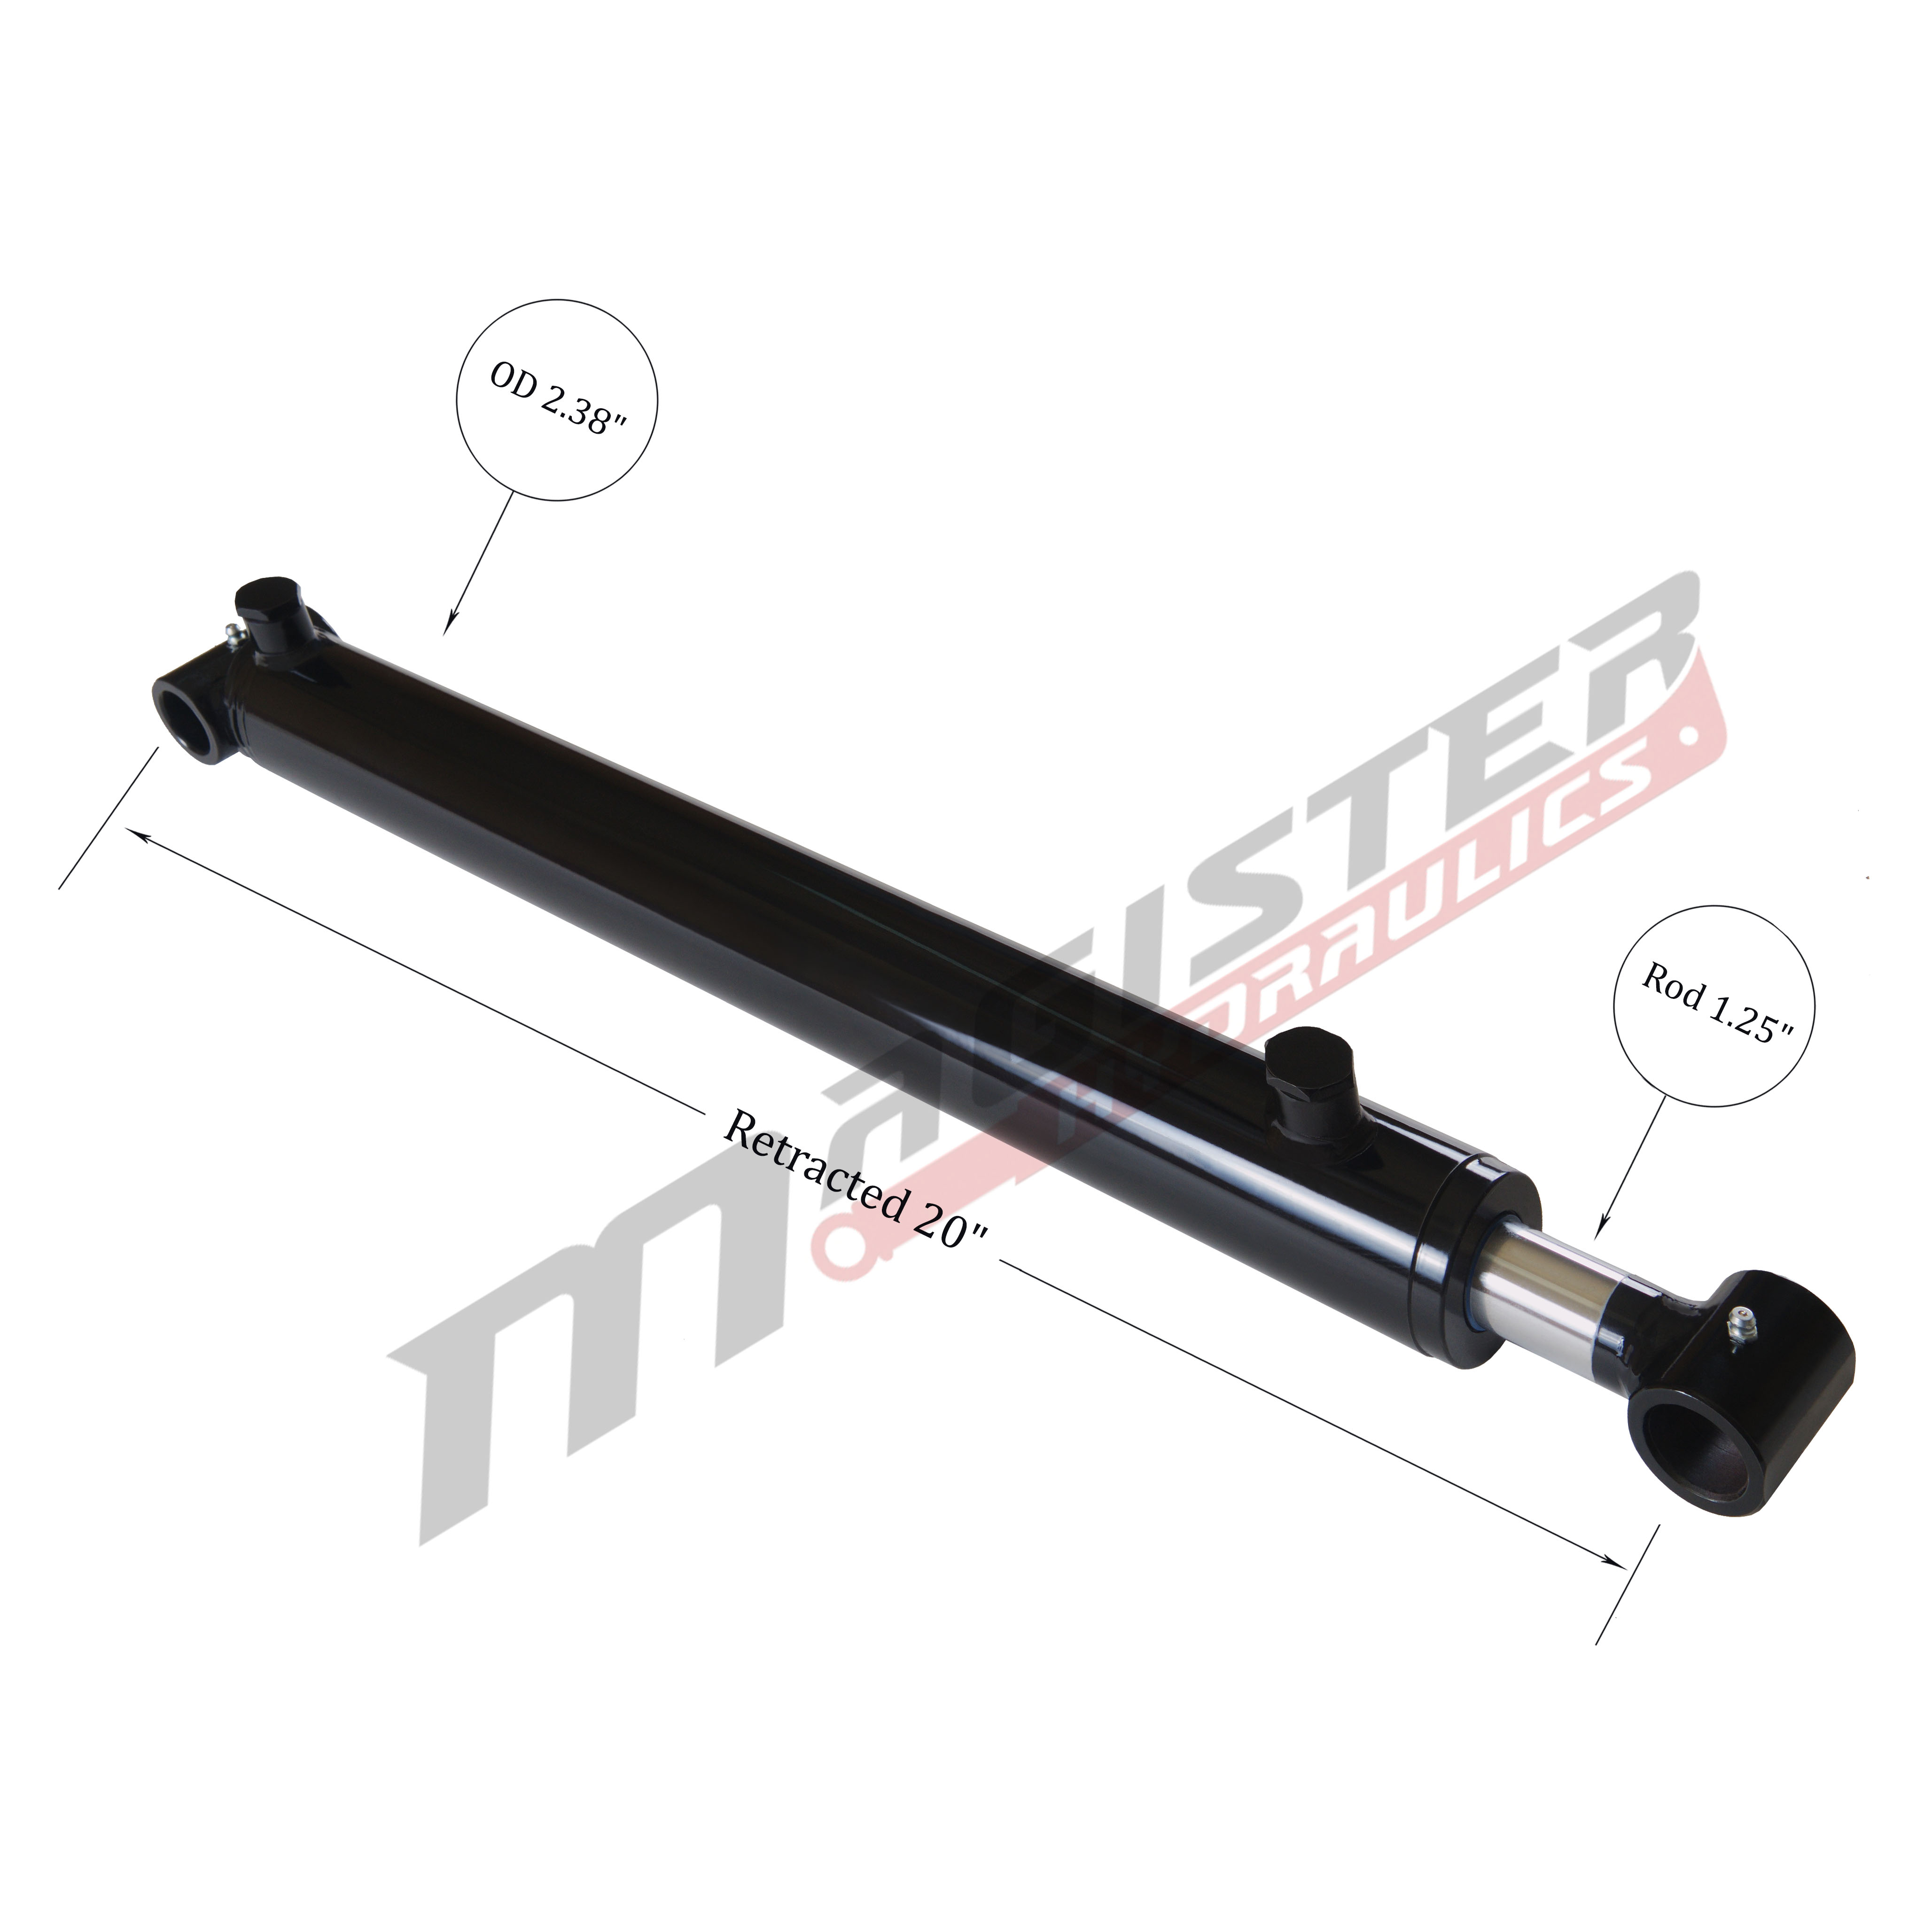 2 bore x 12 stroke hydraulic cylinder, welded cross tube double acting cylinder | Magister Hydraulics